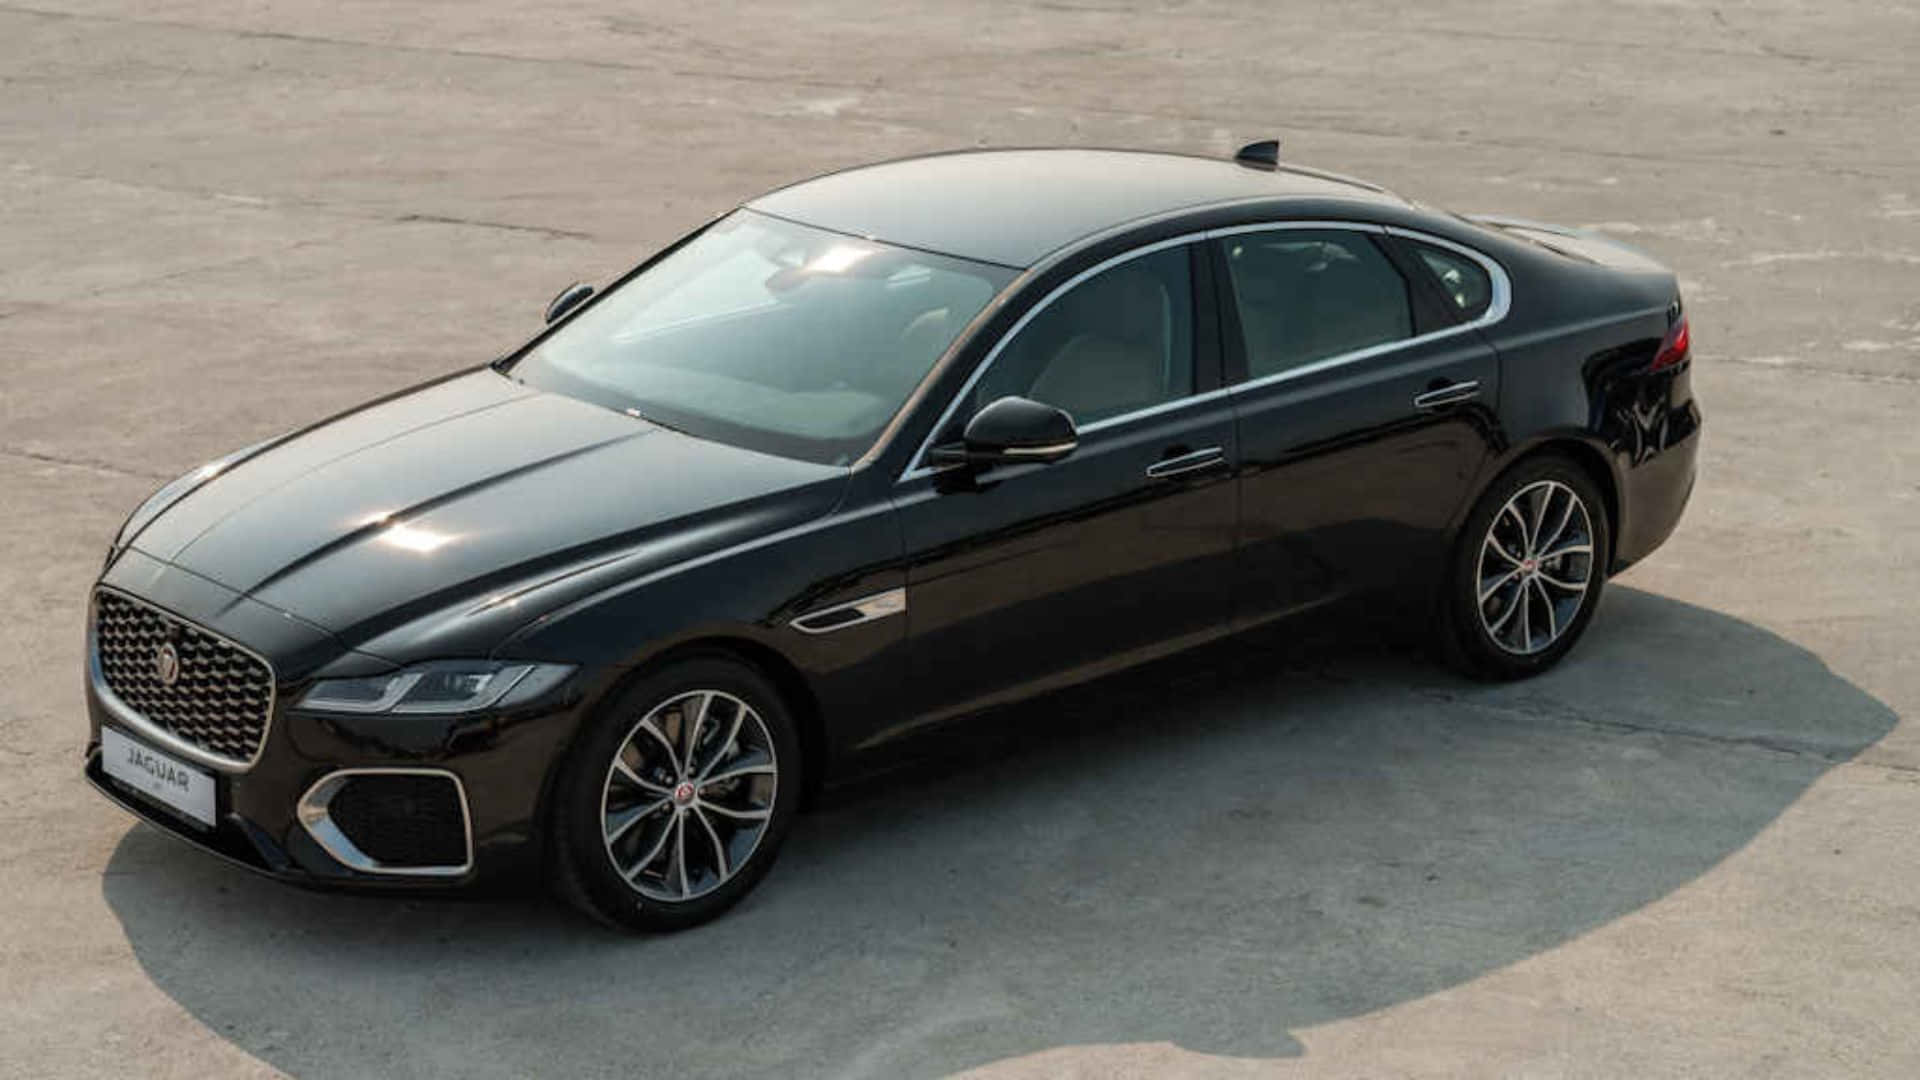 Sleek And Sophisticated Jaguar Xf In Action Wallpaper